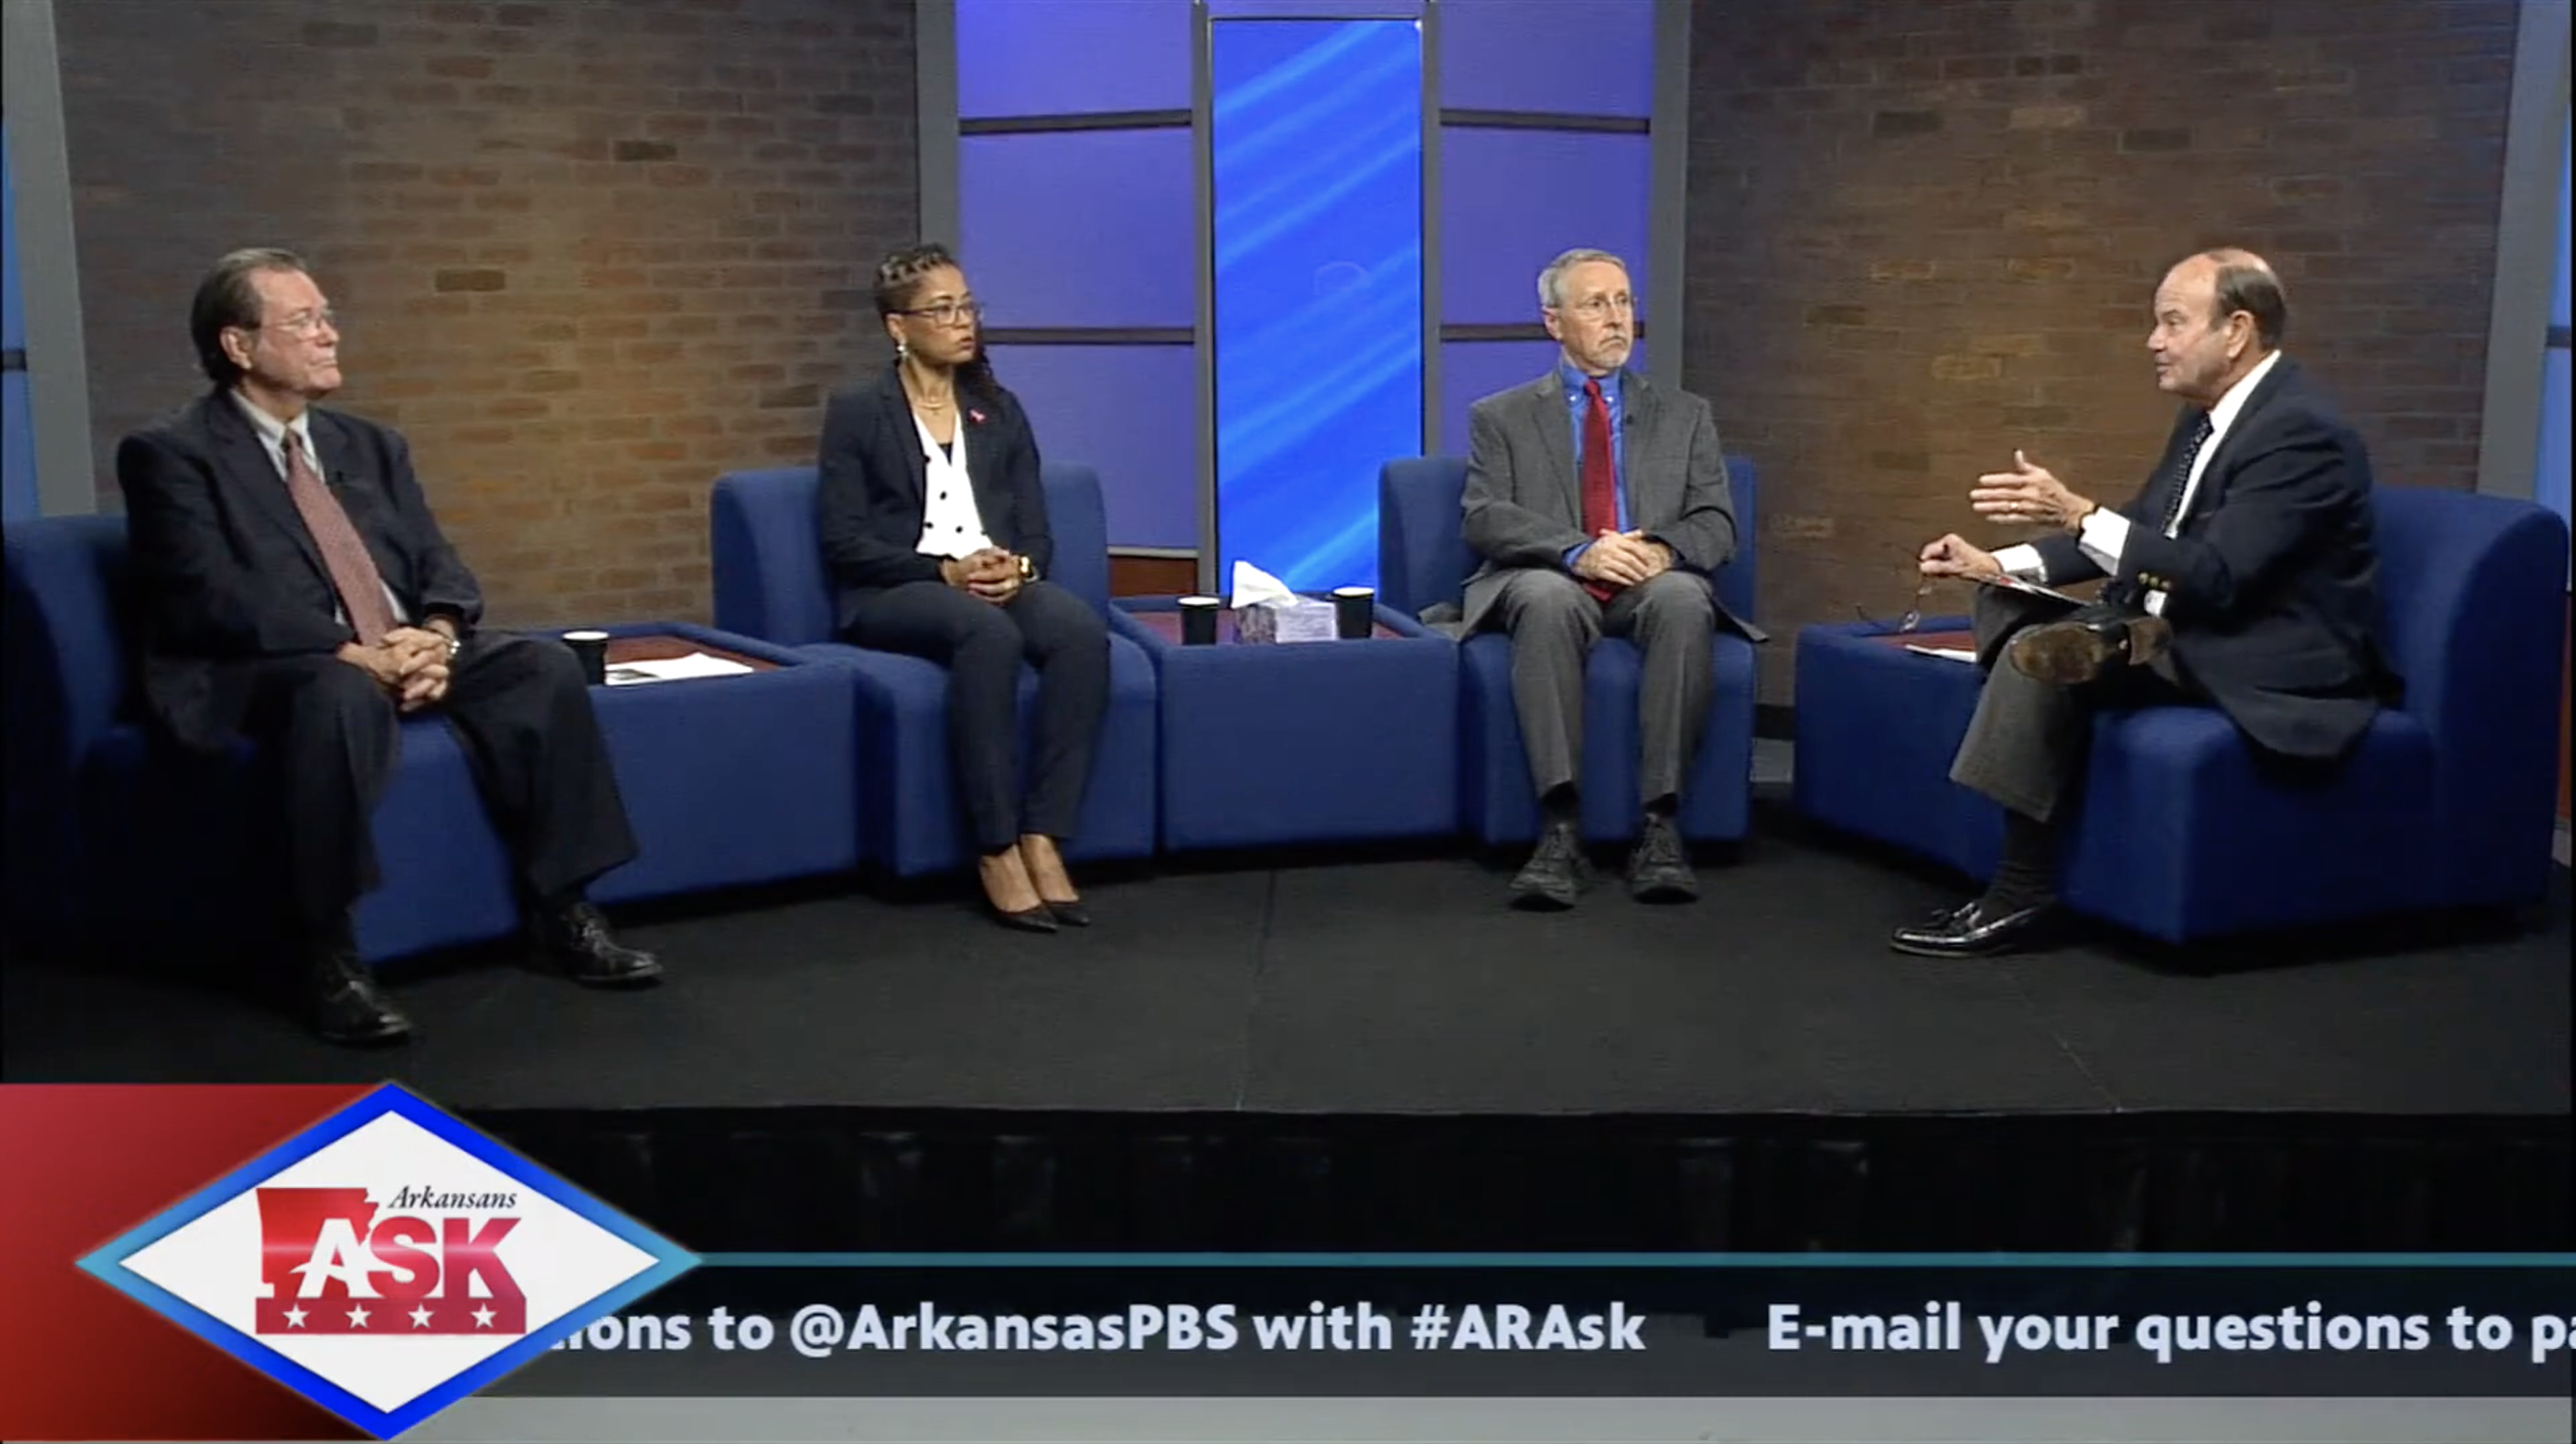 Gregg Reep takes part in live Arkansas PBS COVID-19 town hall broadcast